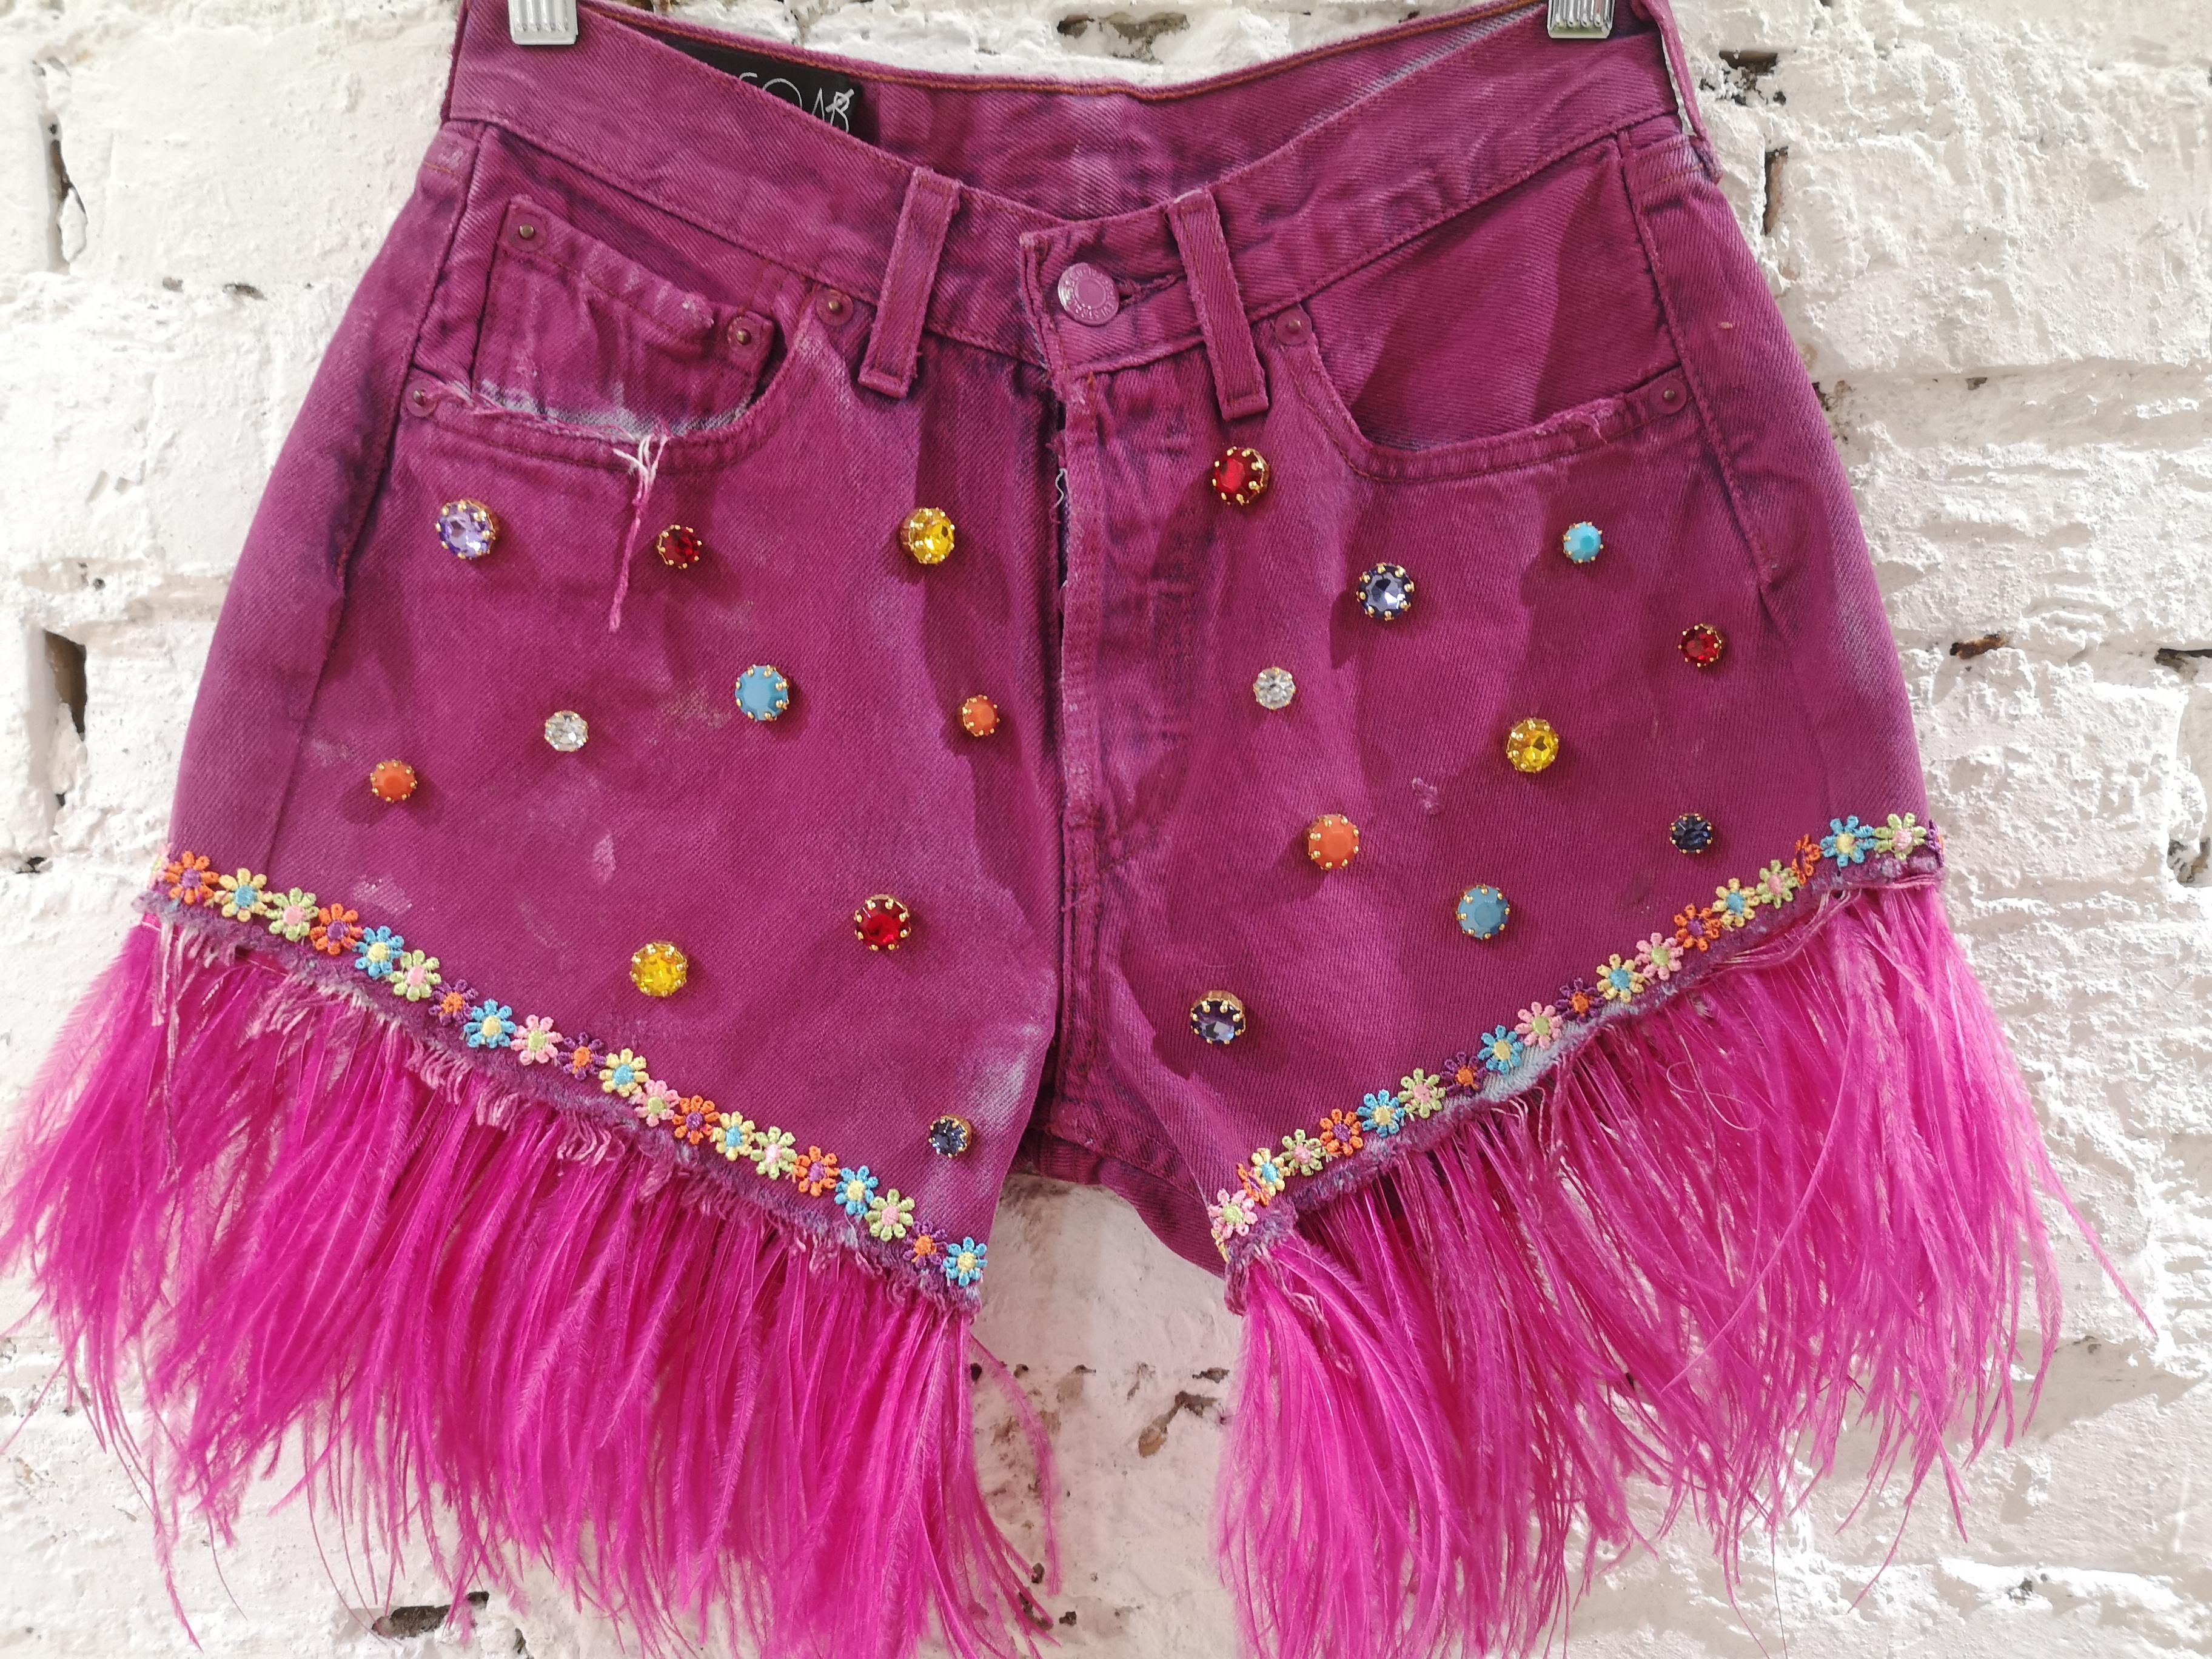 Fucsia painted denim SOAB shorts 
vintage shorts recycled and customised totally handmade embellished with sequins, fringes and patterns all over
composition: cotton
total lenght: 25 cm plus 10 cm fringes 
waist 62 cm